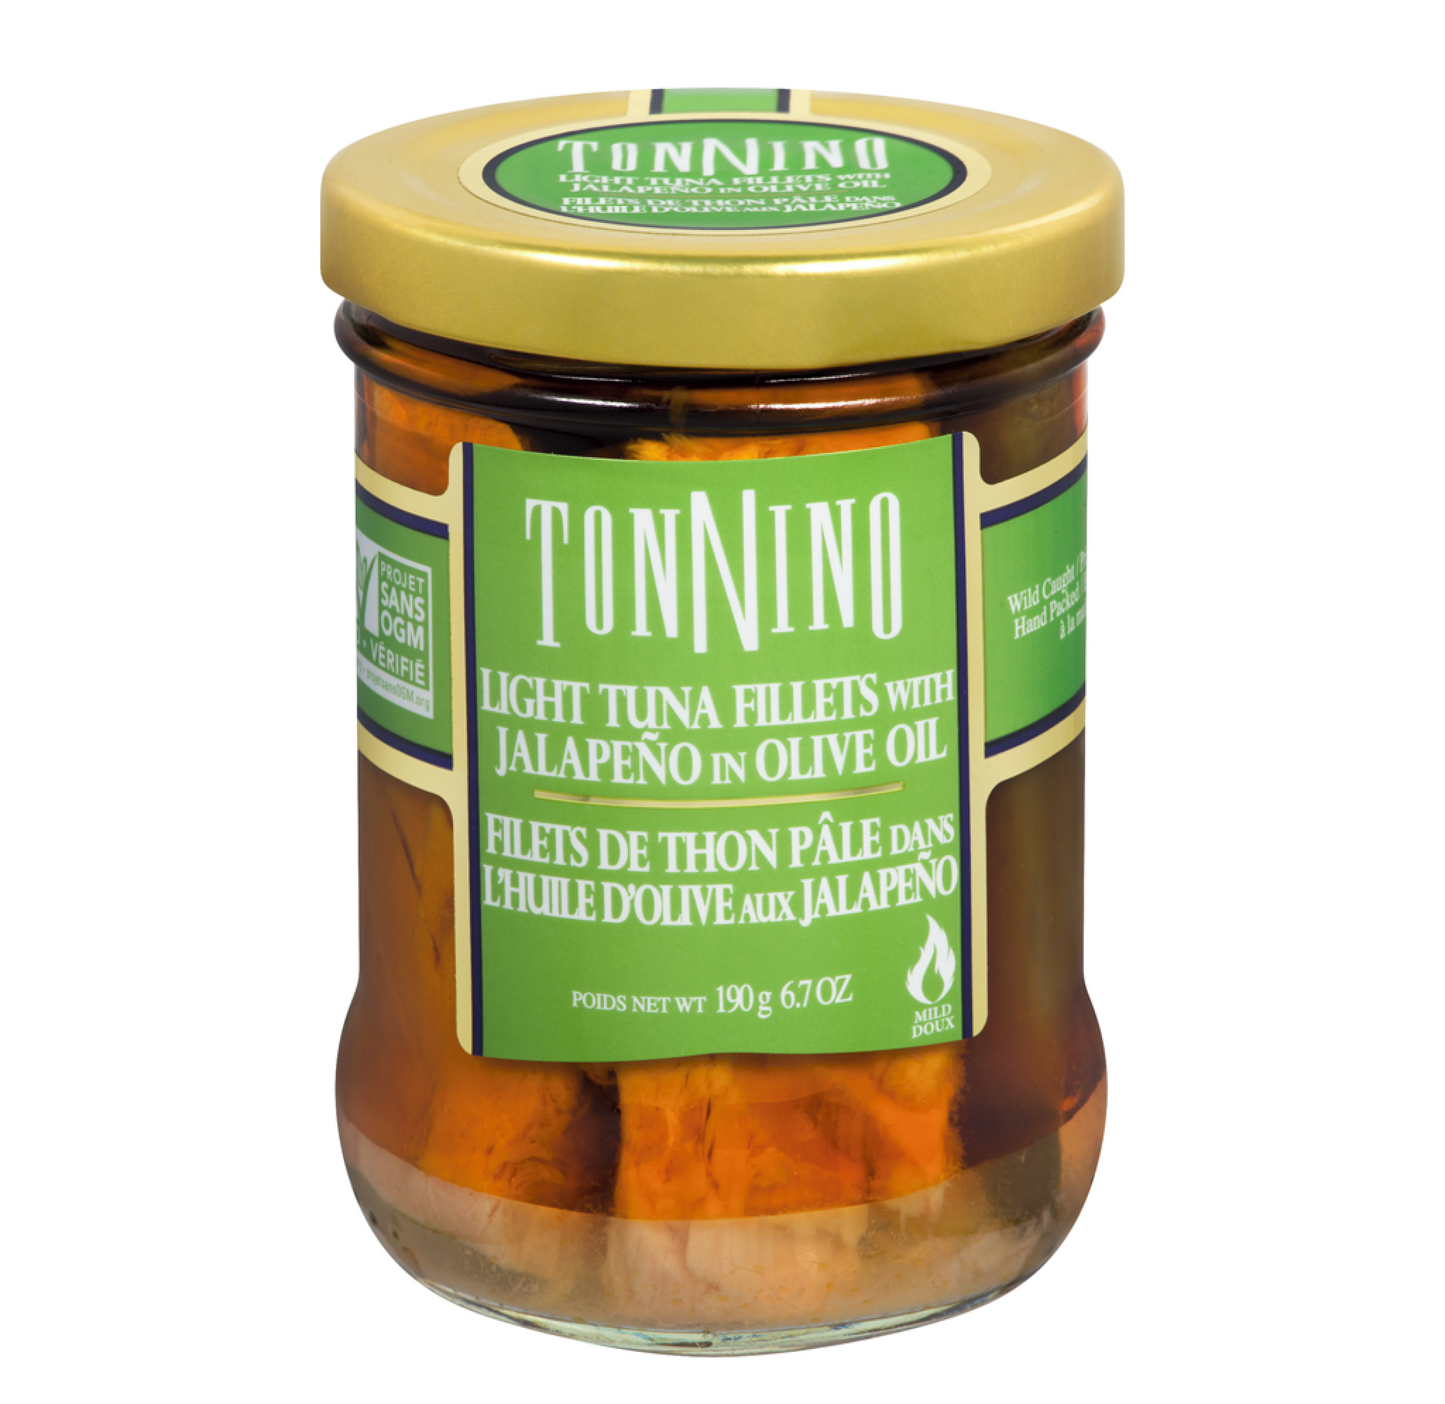 Tonnino Light Tuna Fillets with Jalapeno in Olive Oil 190g